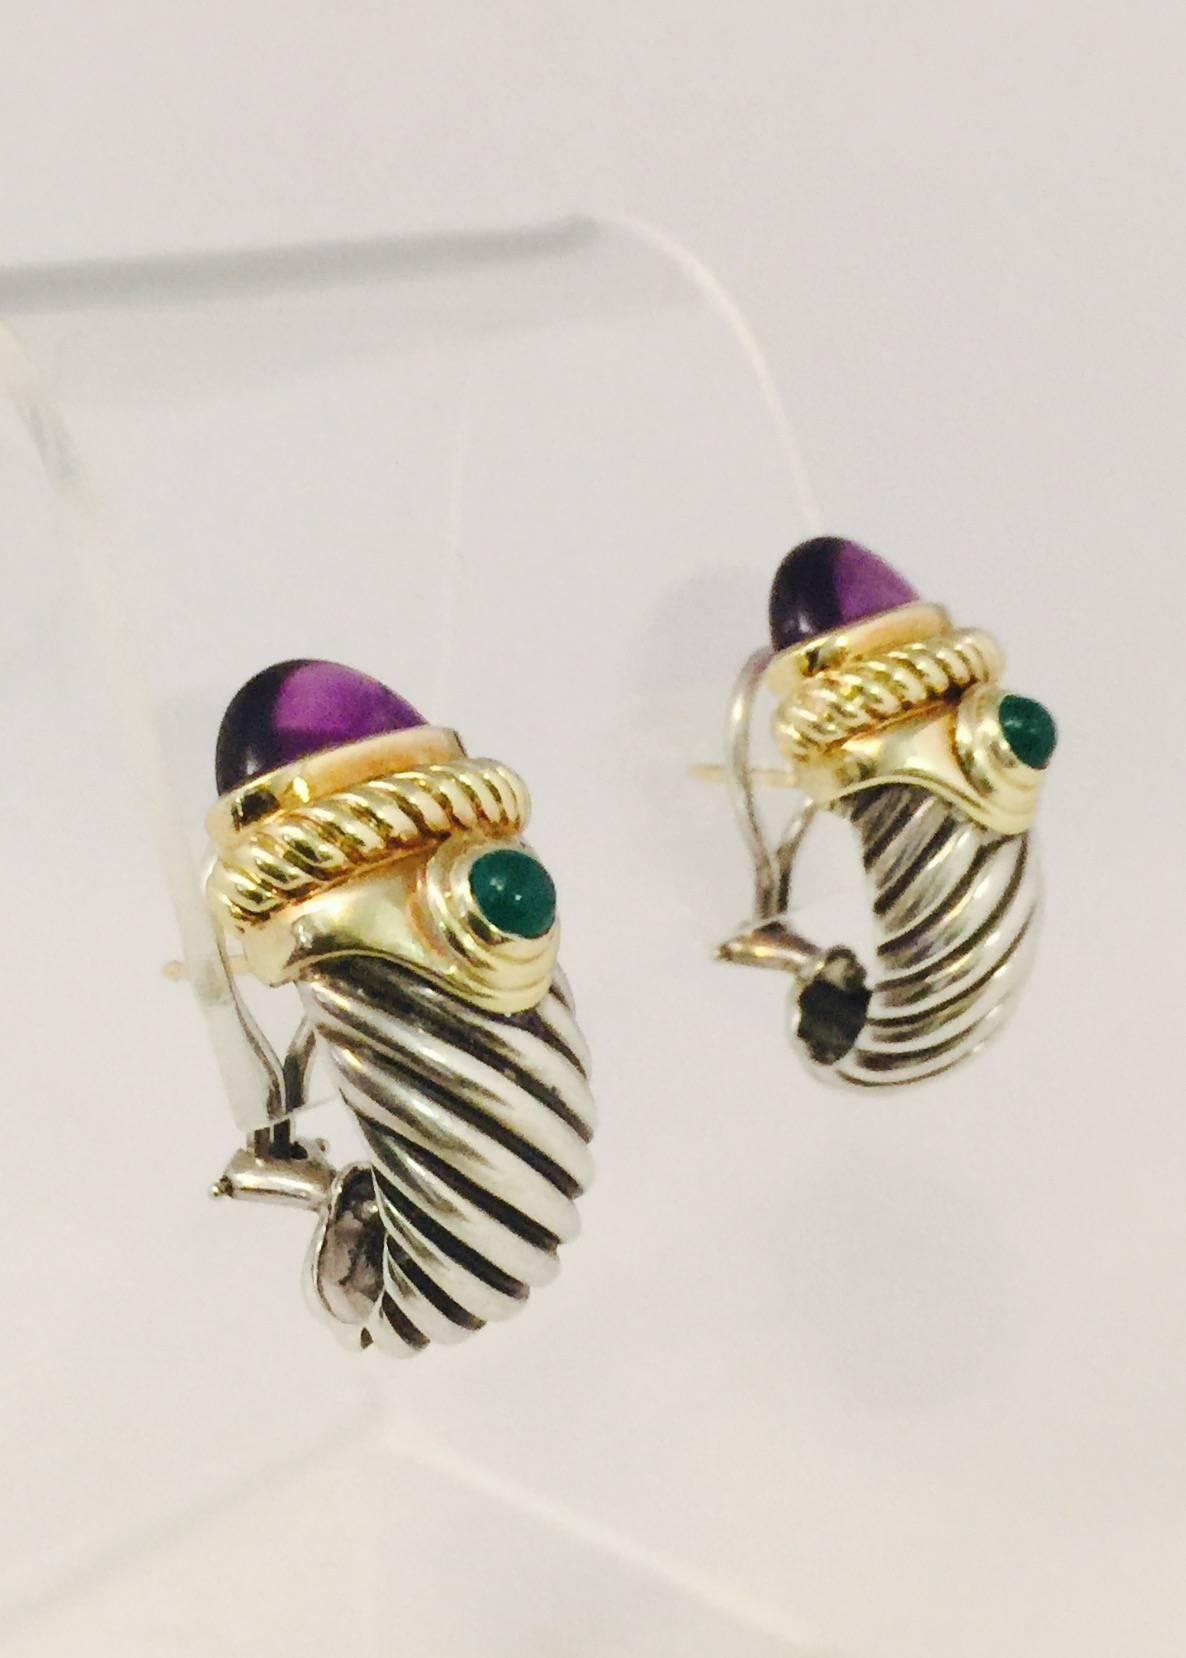 David Yurman has created a cable look that is instantly recognizable.  These fabulous Omega back pierced earrings feature the cable design as well as being topped by 14 karat yellow gold.  A bezel set cabochon amethyst is the focal point followed by